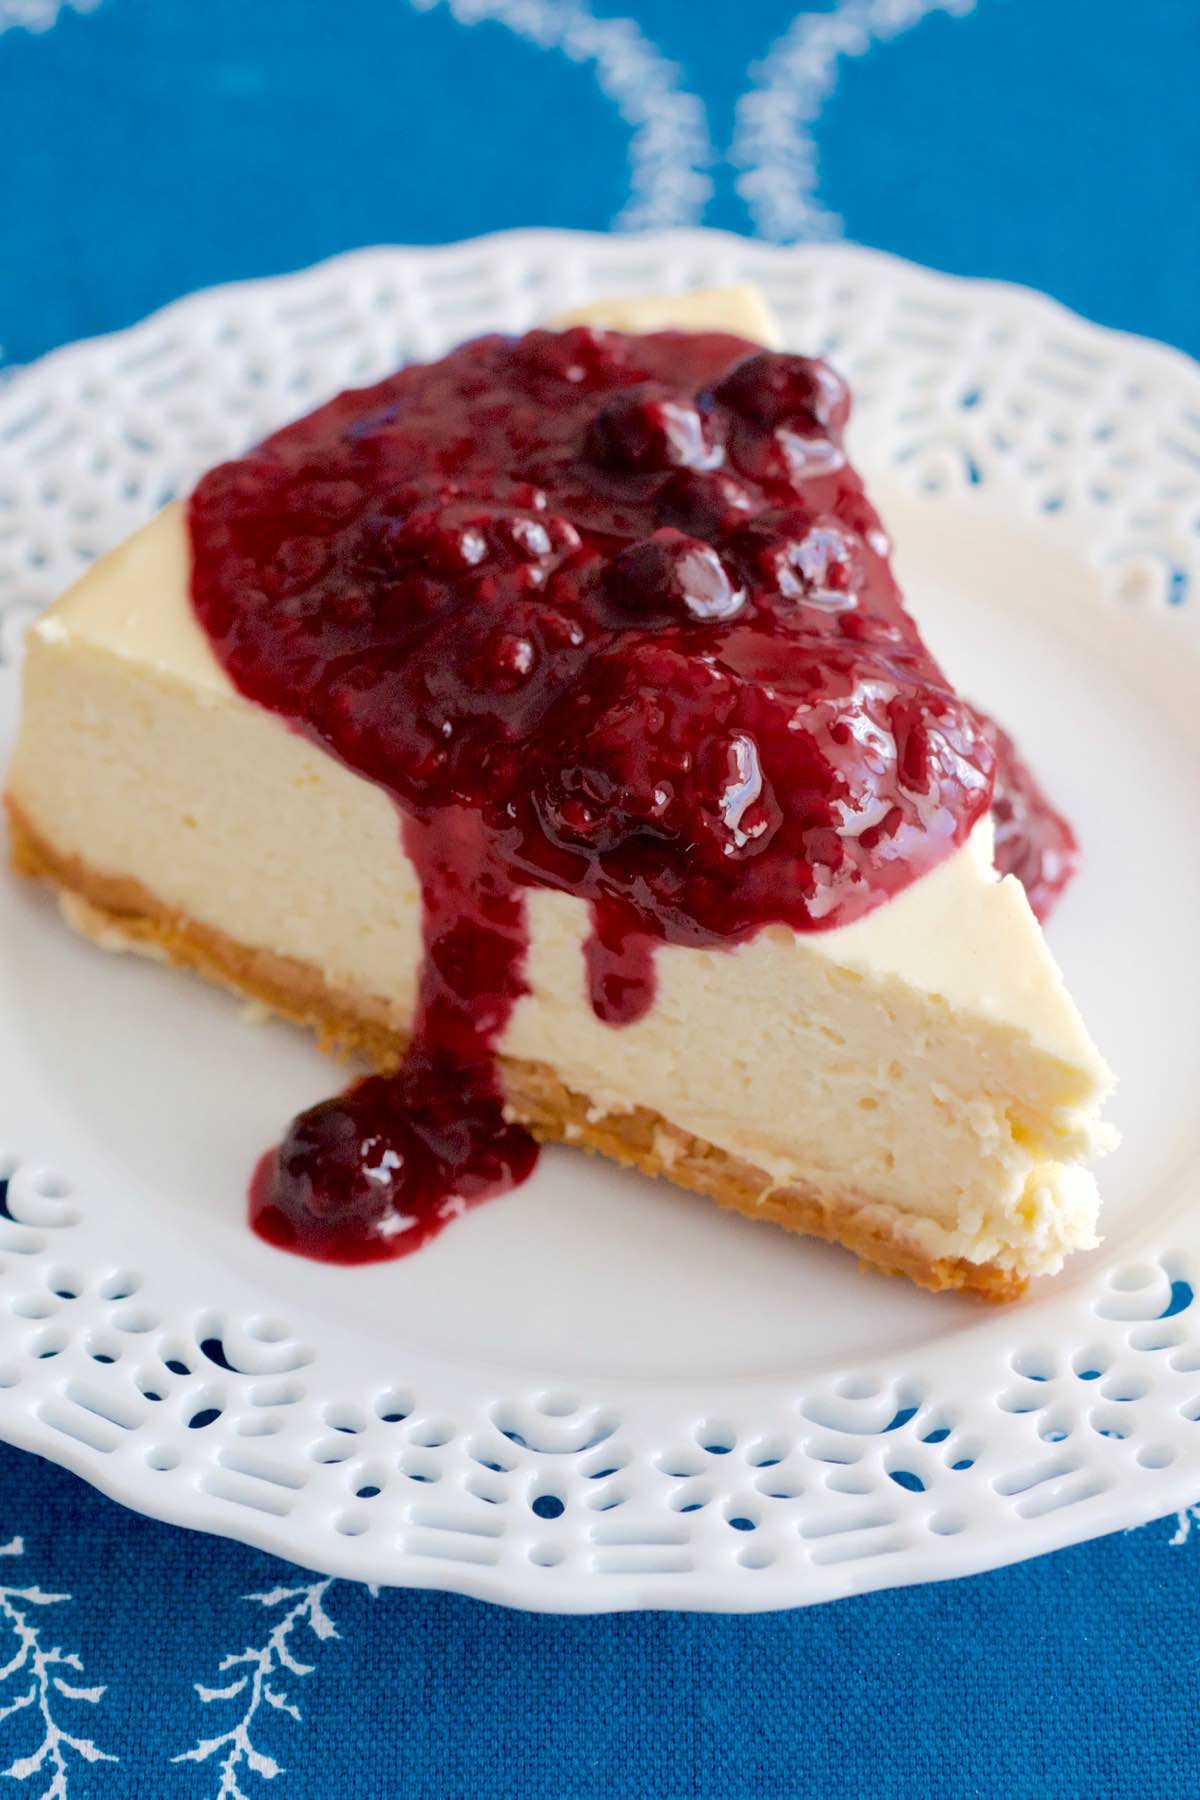 A slice of Classic Cheesecake Mixed Berries Sauce on a plate.